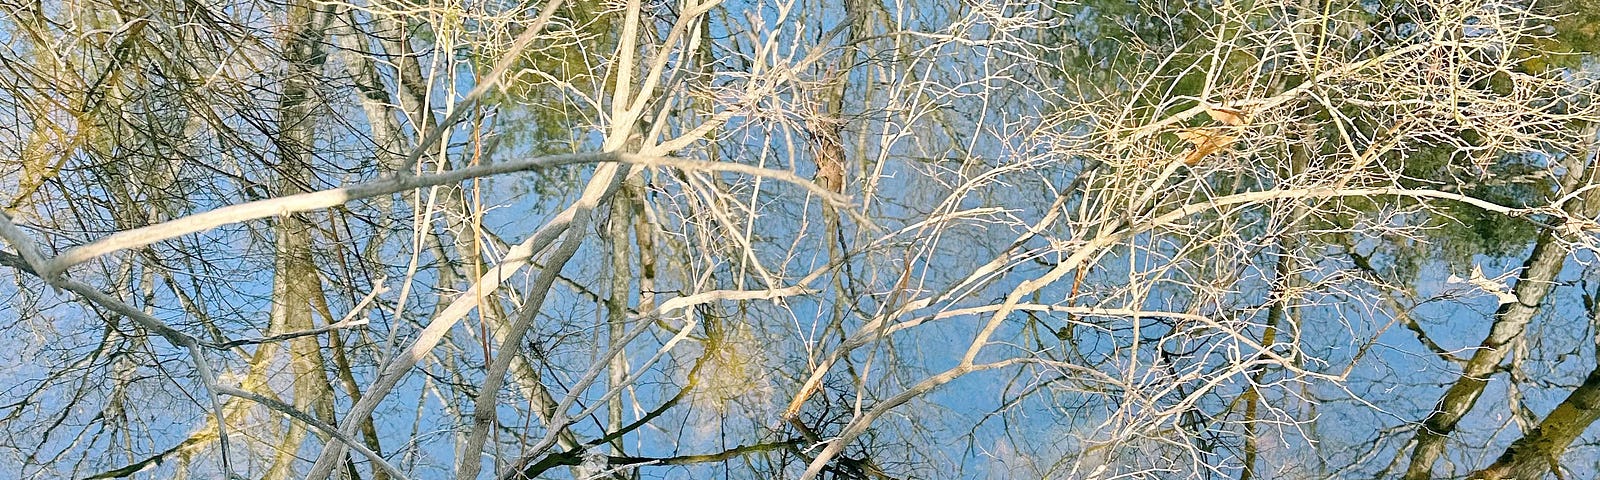 picture of a pond and tree branches